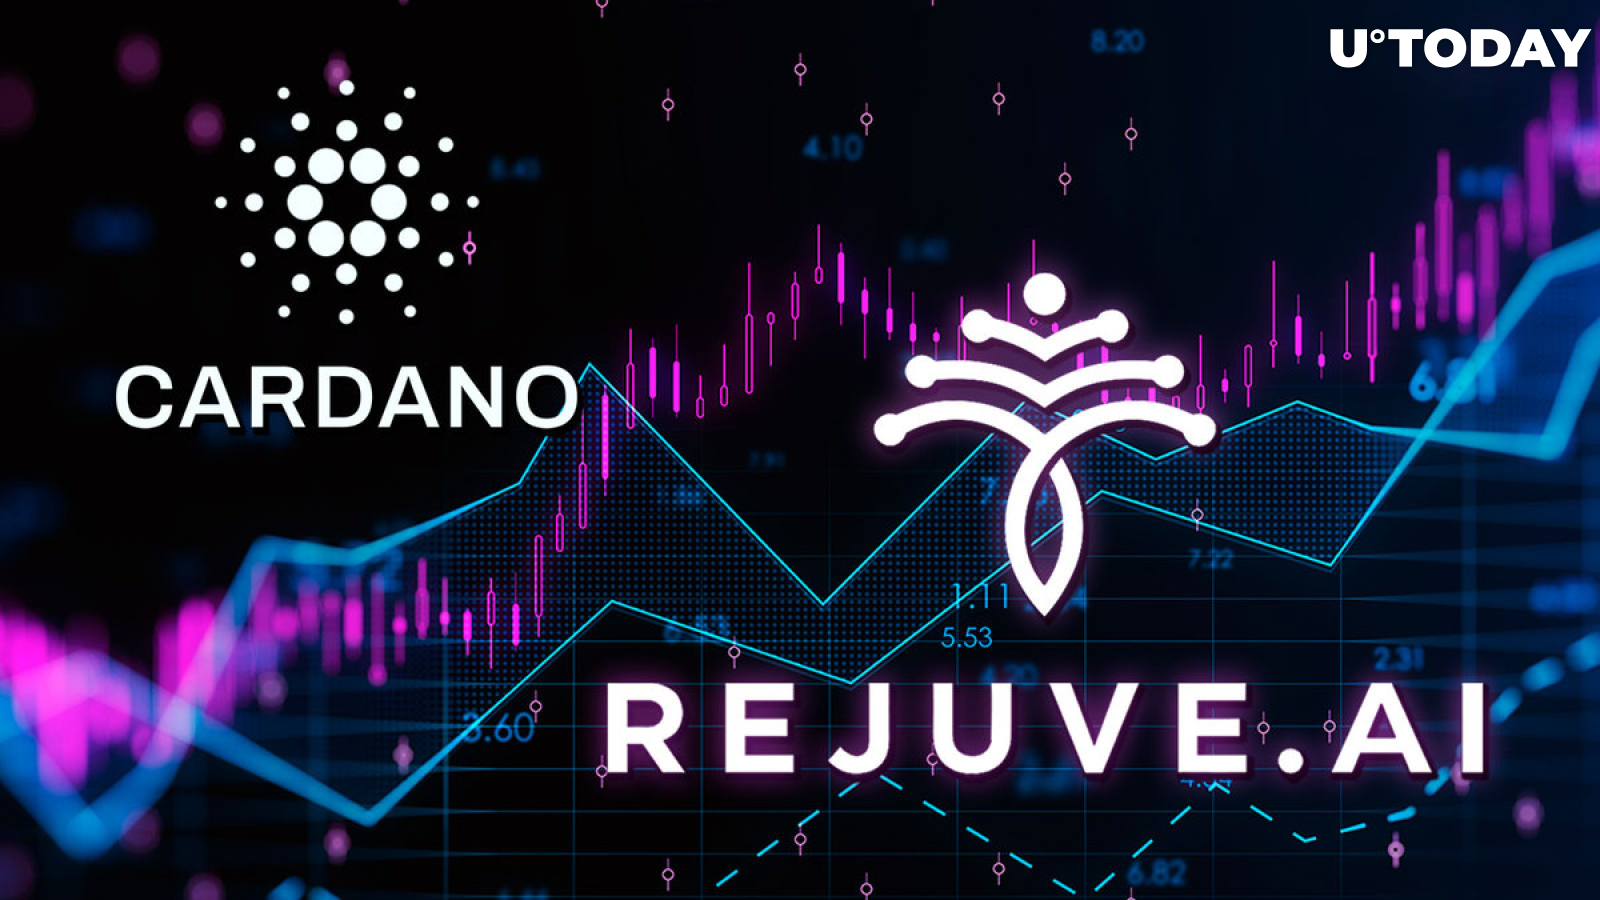 This Cardano AI Token Soars 93% in 2 Days, but There's Catch